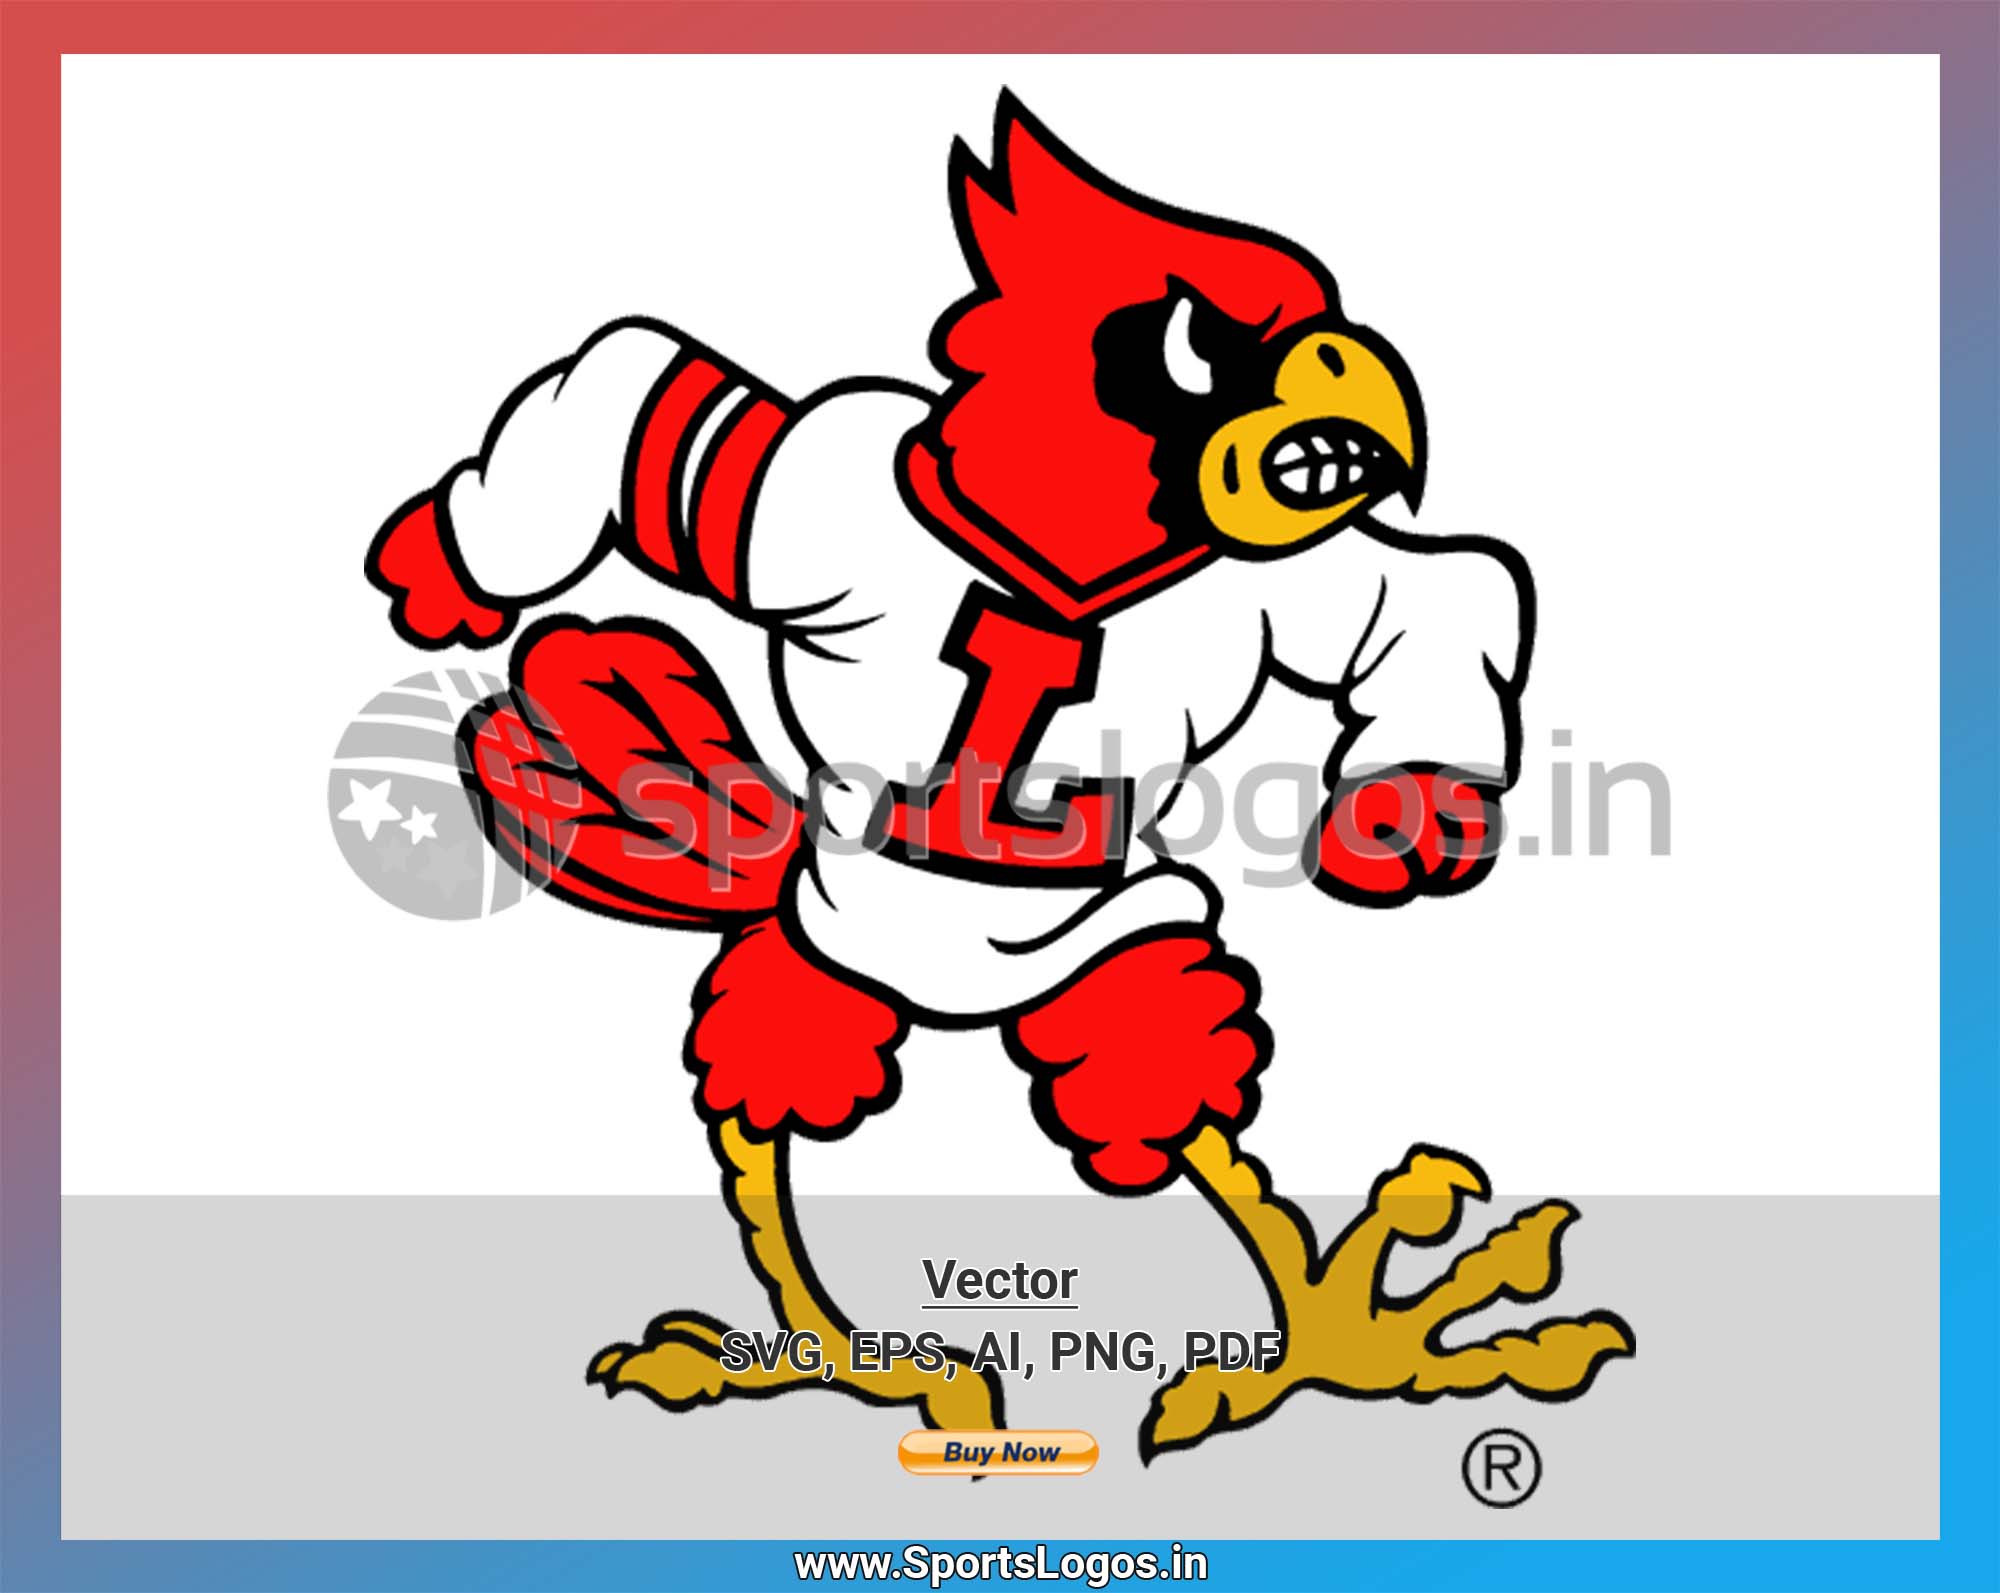 Louisville Cardinals All Over Print Logo And Coconut Trending